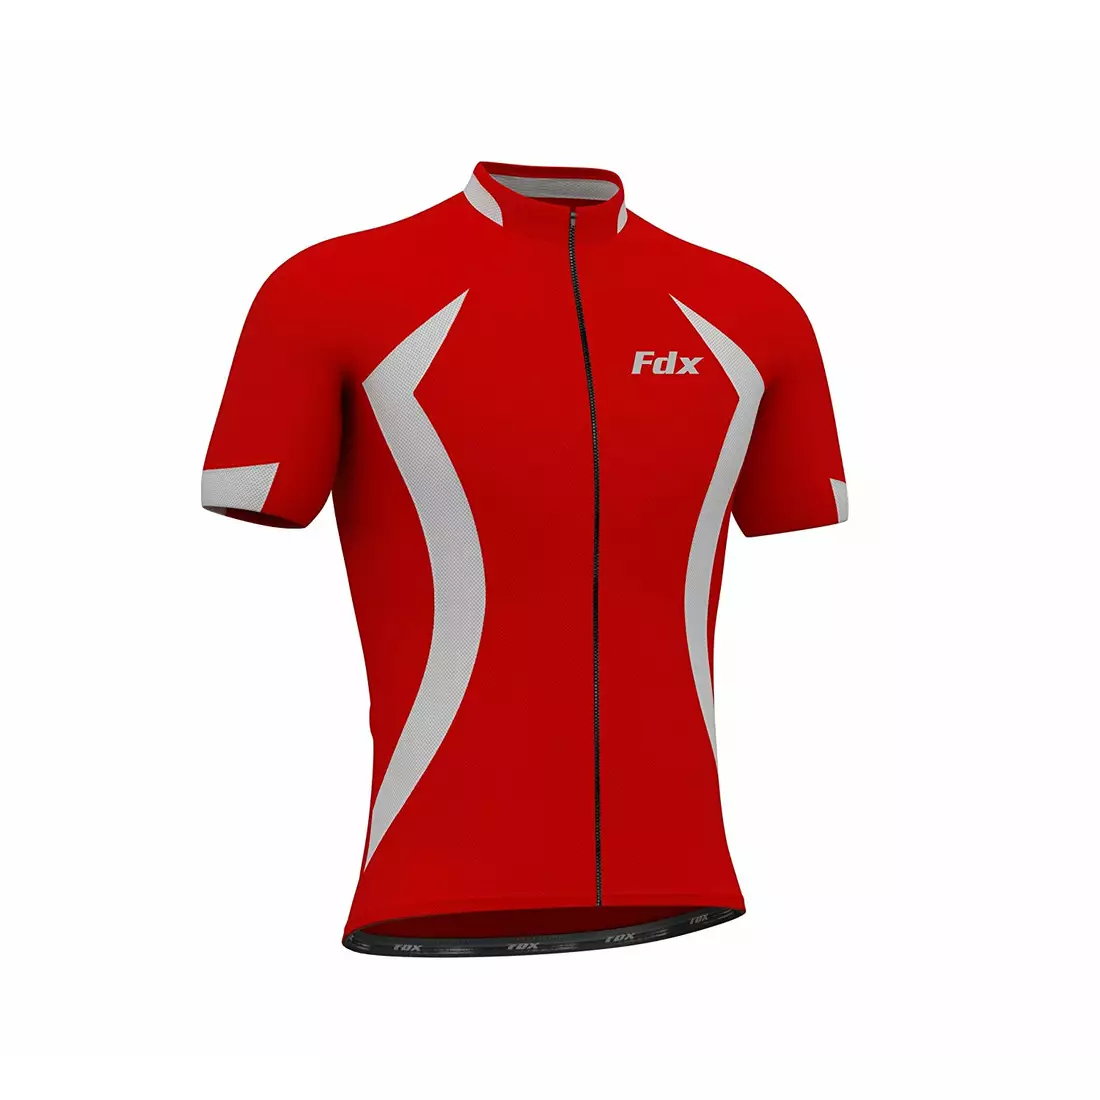 FDX 1090 cycling jersey, red and white